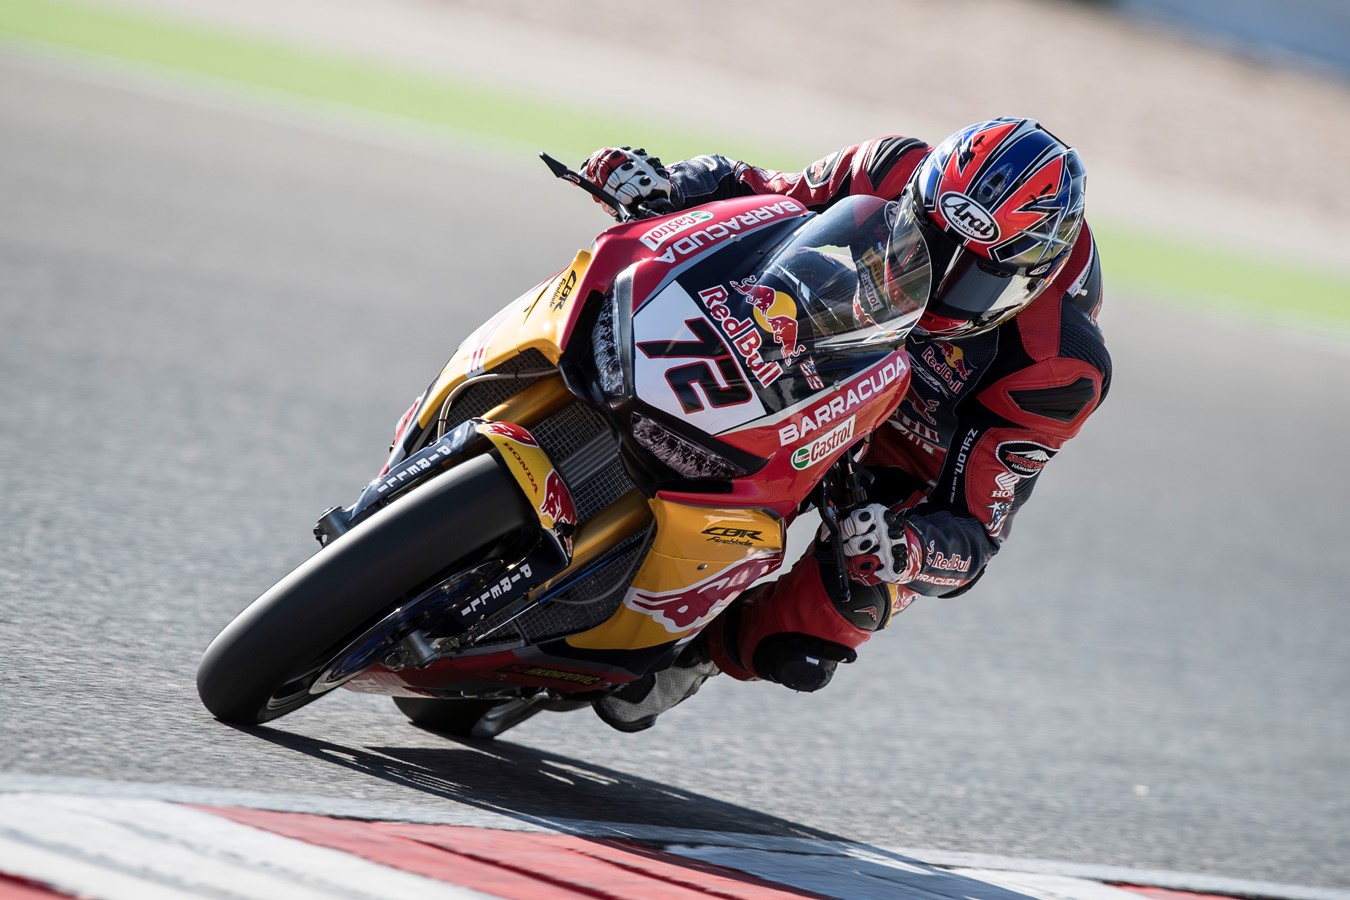 First World Championship point for Takahashi as Bradl crashes out of eighth place